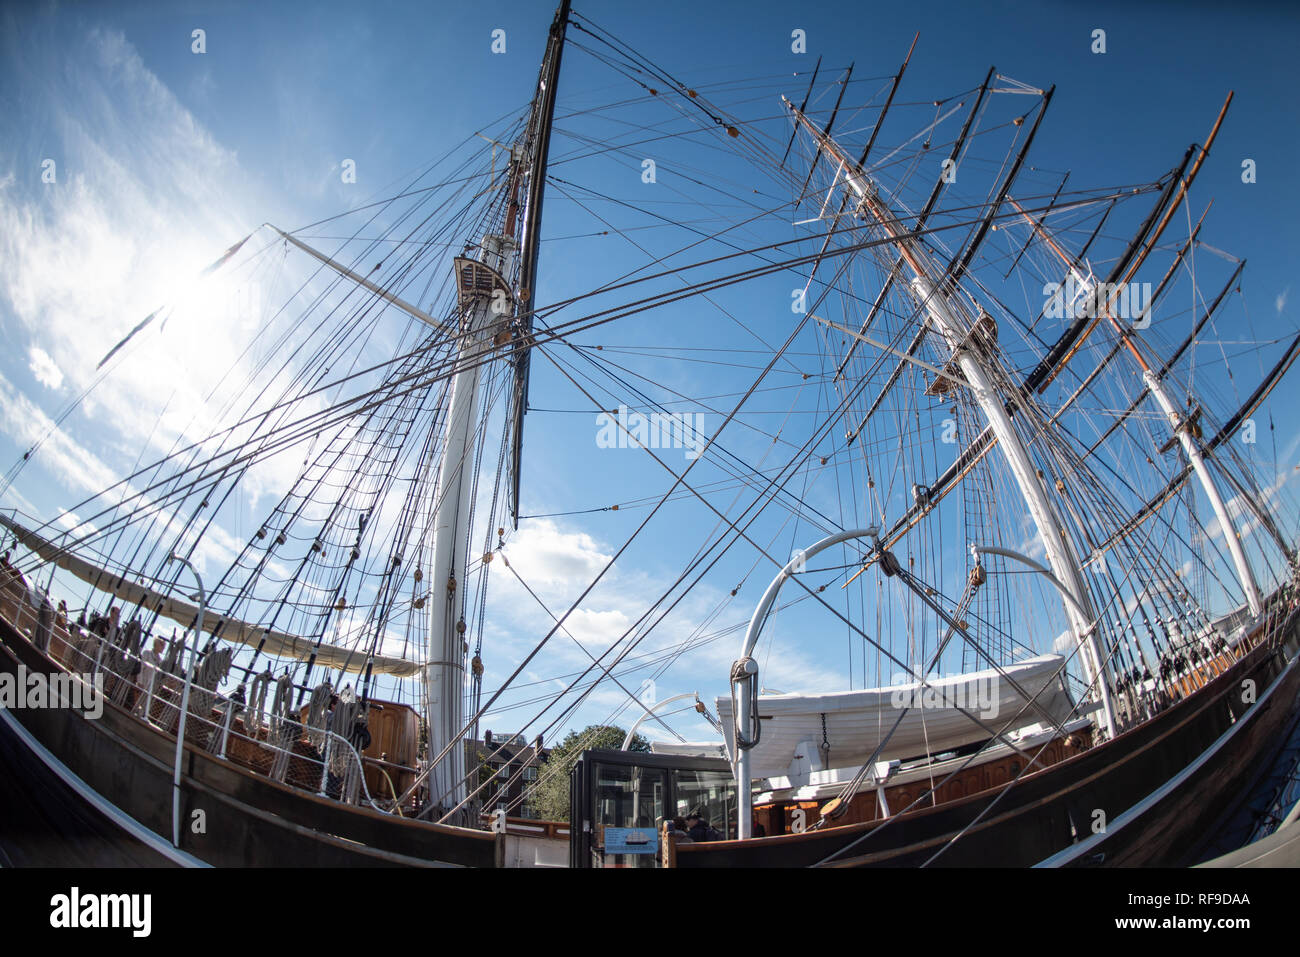 Klinik Awaken frakke GREENWICH, UK - The Cutty Sark is a restored historic British clipper  sailing ship that is now open as a tourist attraction in Greenwich, London.  It was built in 1869 and in